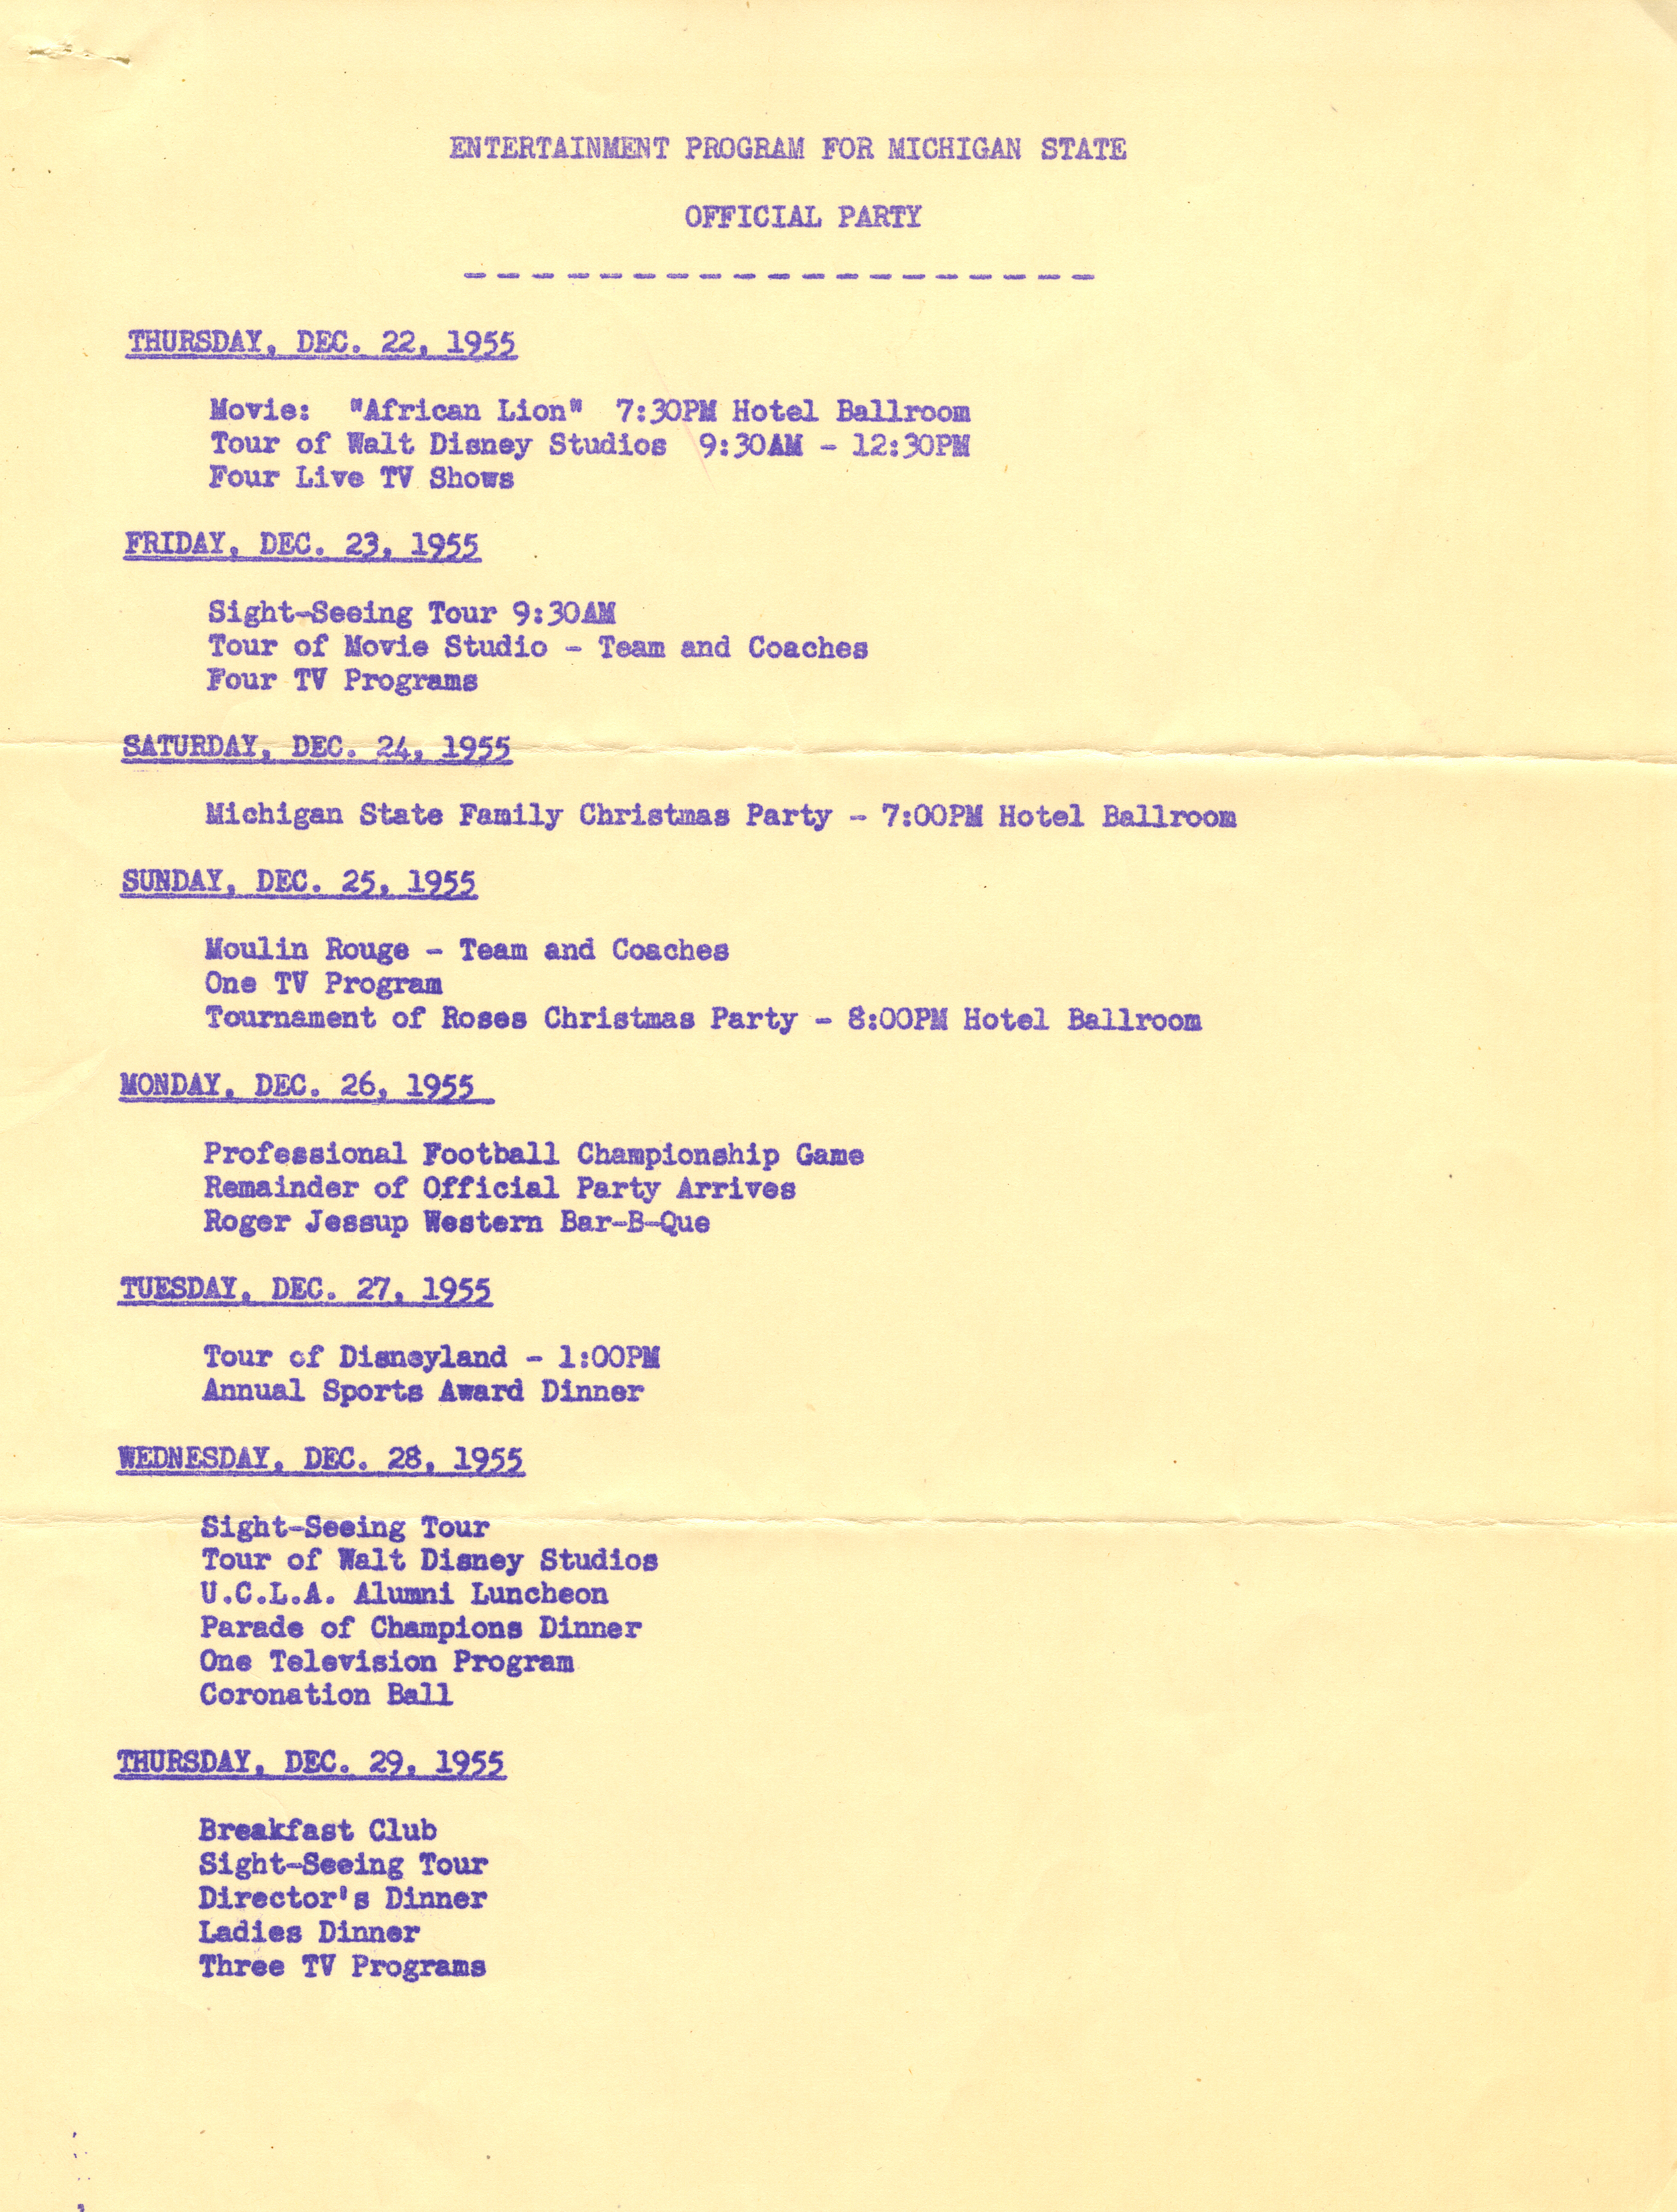 Entertainment program for Michigan State Official Party, 1955-1956